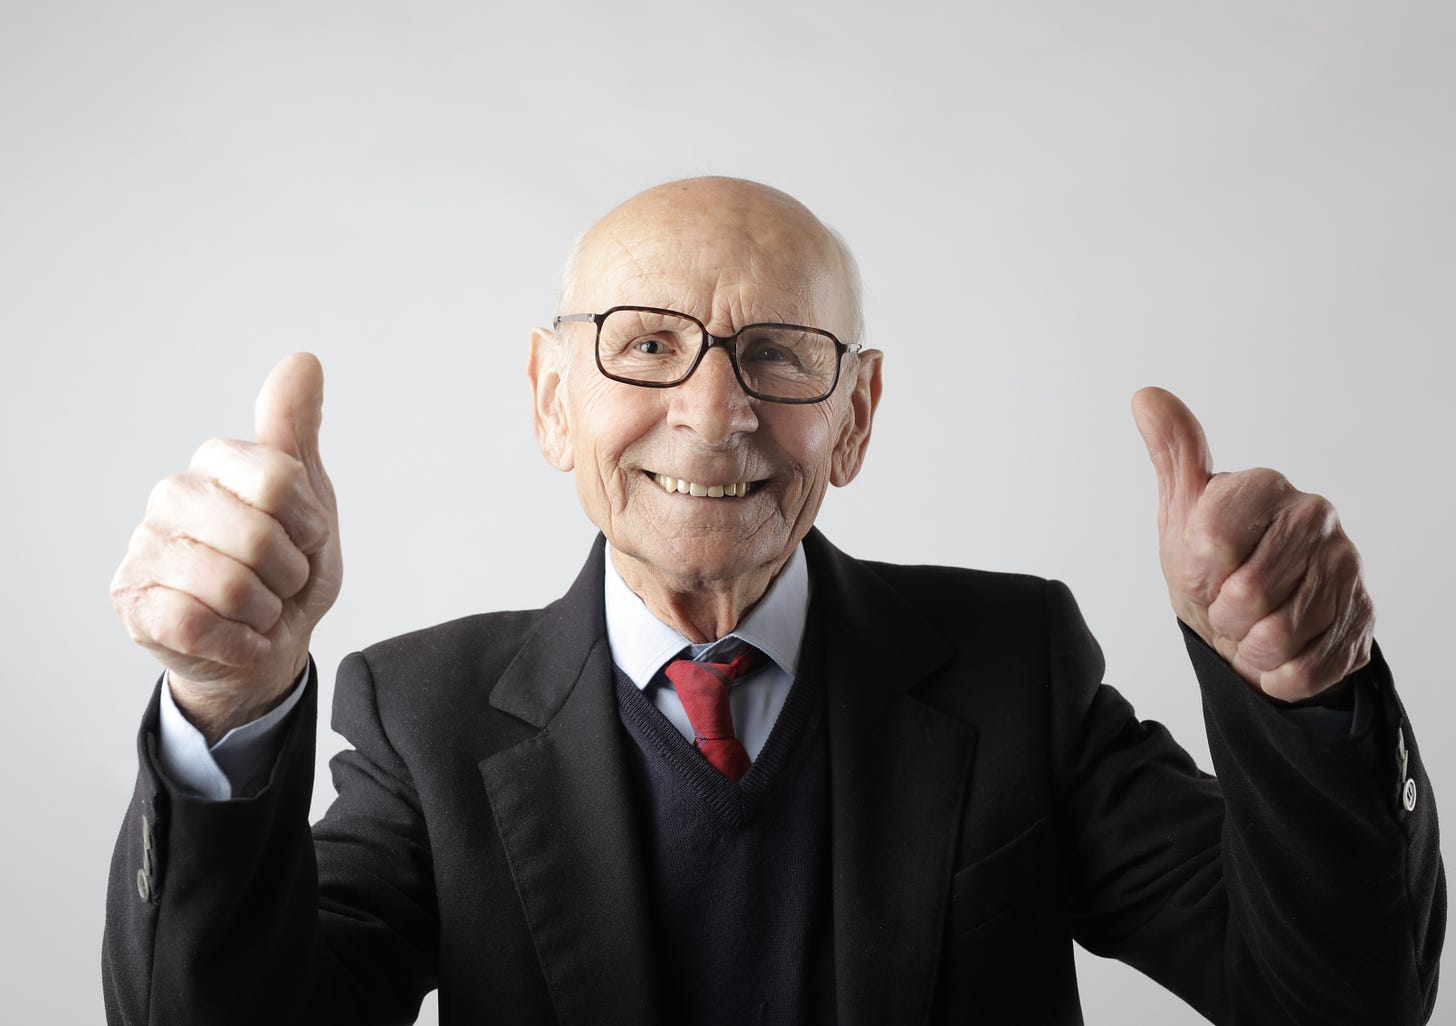 Old man in a suit smiling and giving the thumbs up with both hands on a white background